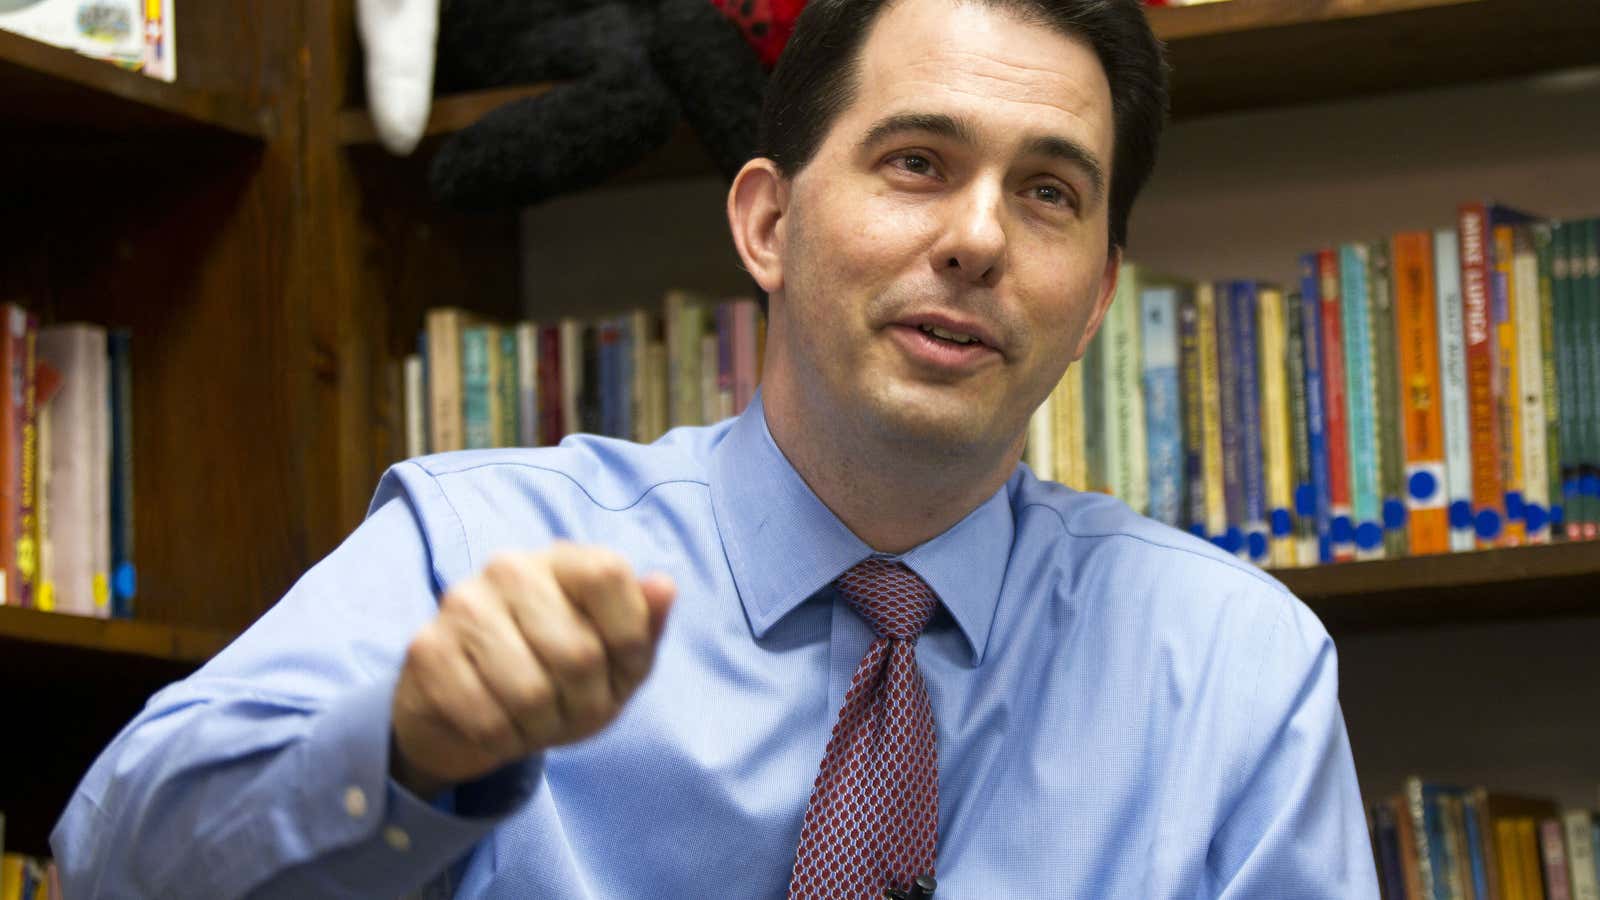 Wisconsin governor Scott Walker has renamed the area in his state where Foxconn will build a factory “Wisconn Valley.”